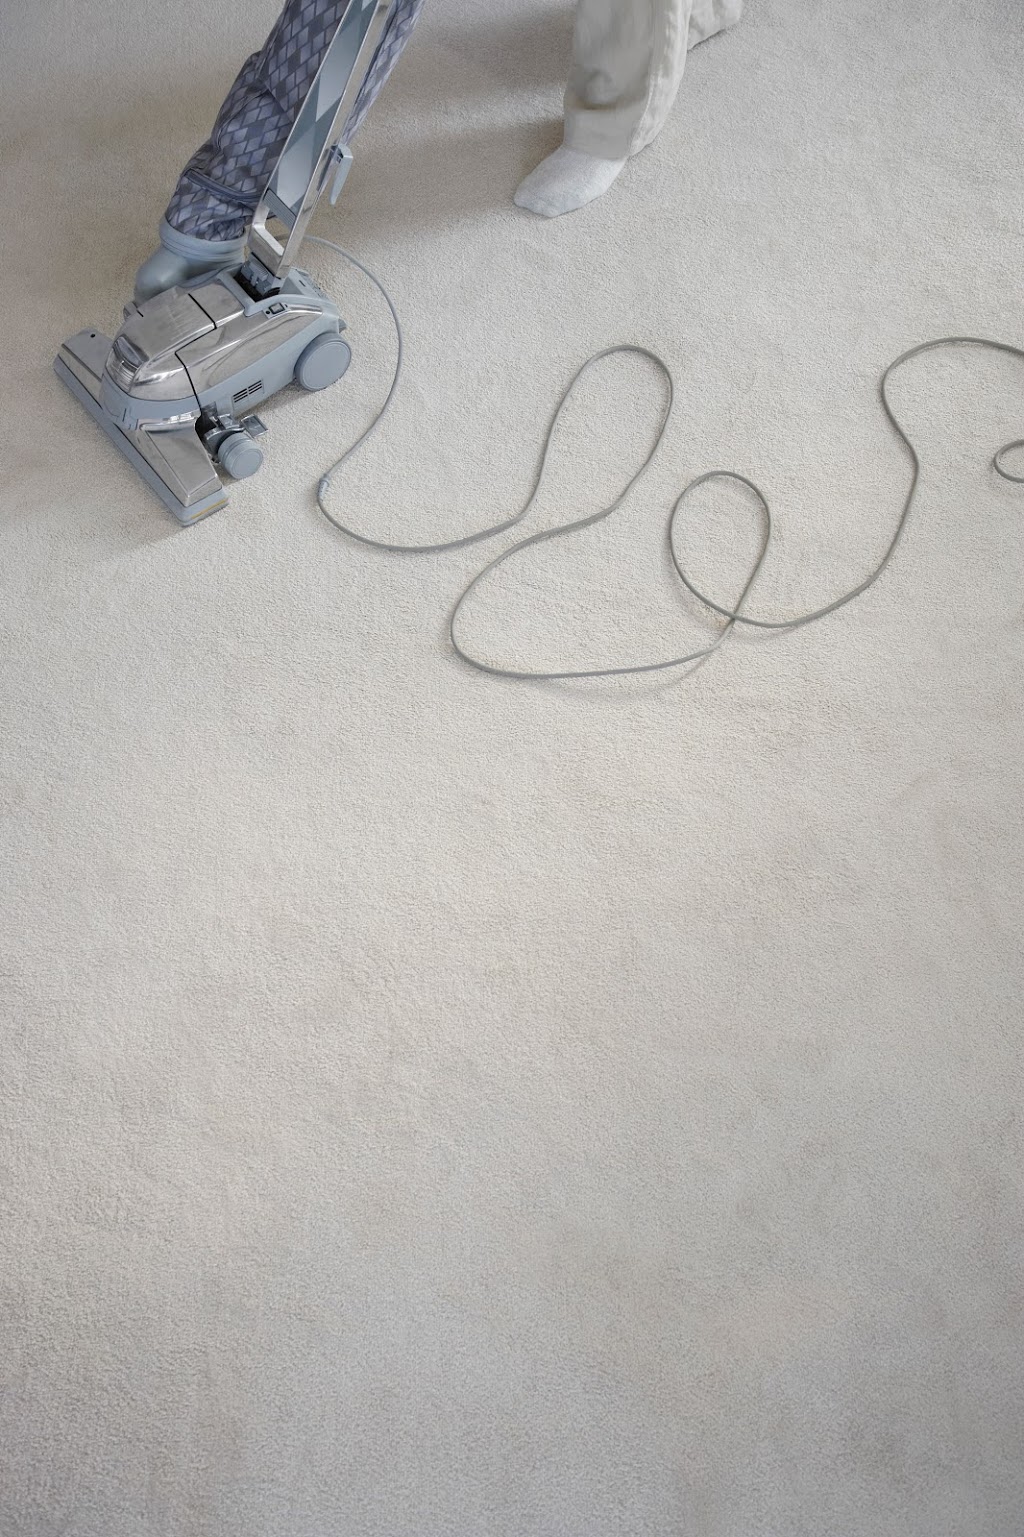 RD Local Carpet Cleaning | laundry | Carpet Cleaning Servicing North Ryde, Denistone, Denistone East,, West Ryde, Putney, Eastwood, North Ryde NSW 2113, Australia | 0287900723 OR +61 2 8790 0723